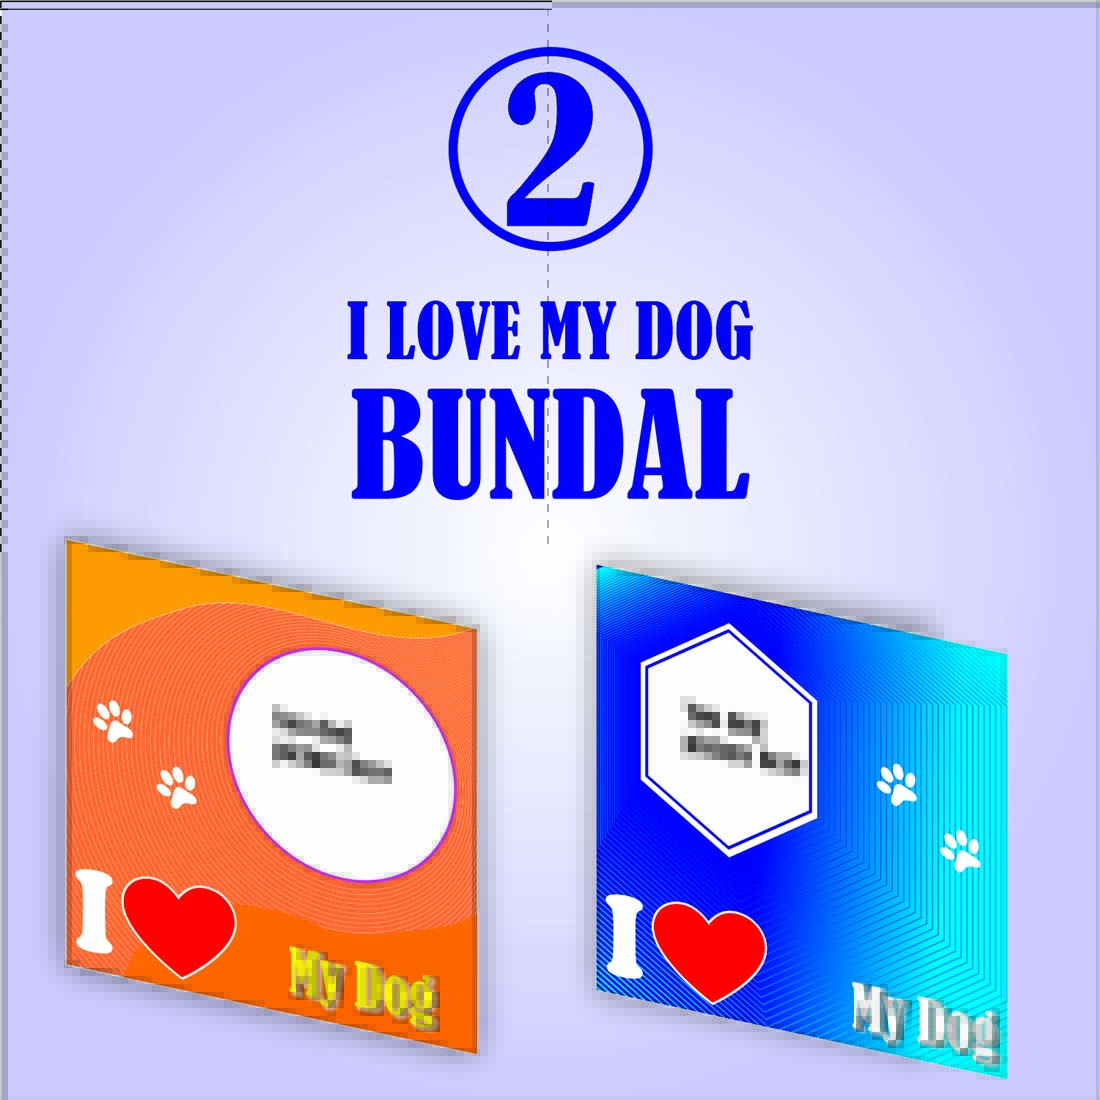 I love my Dog (2 picture Bundal) cover image.